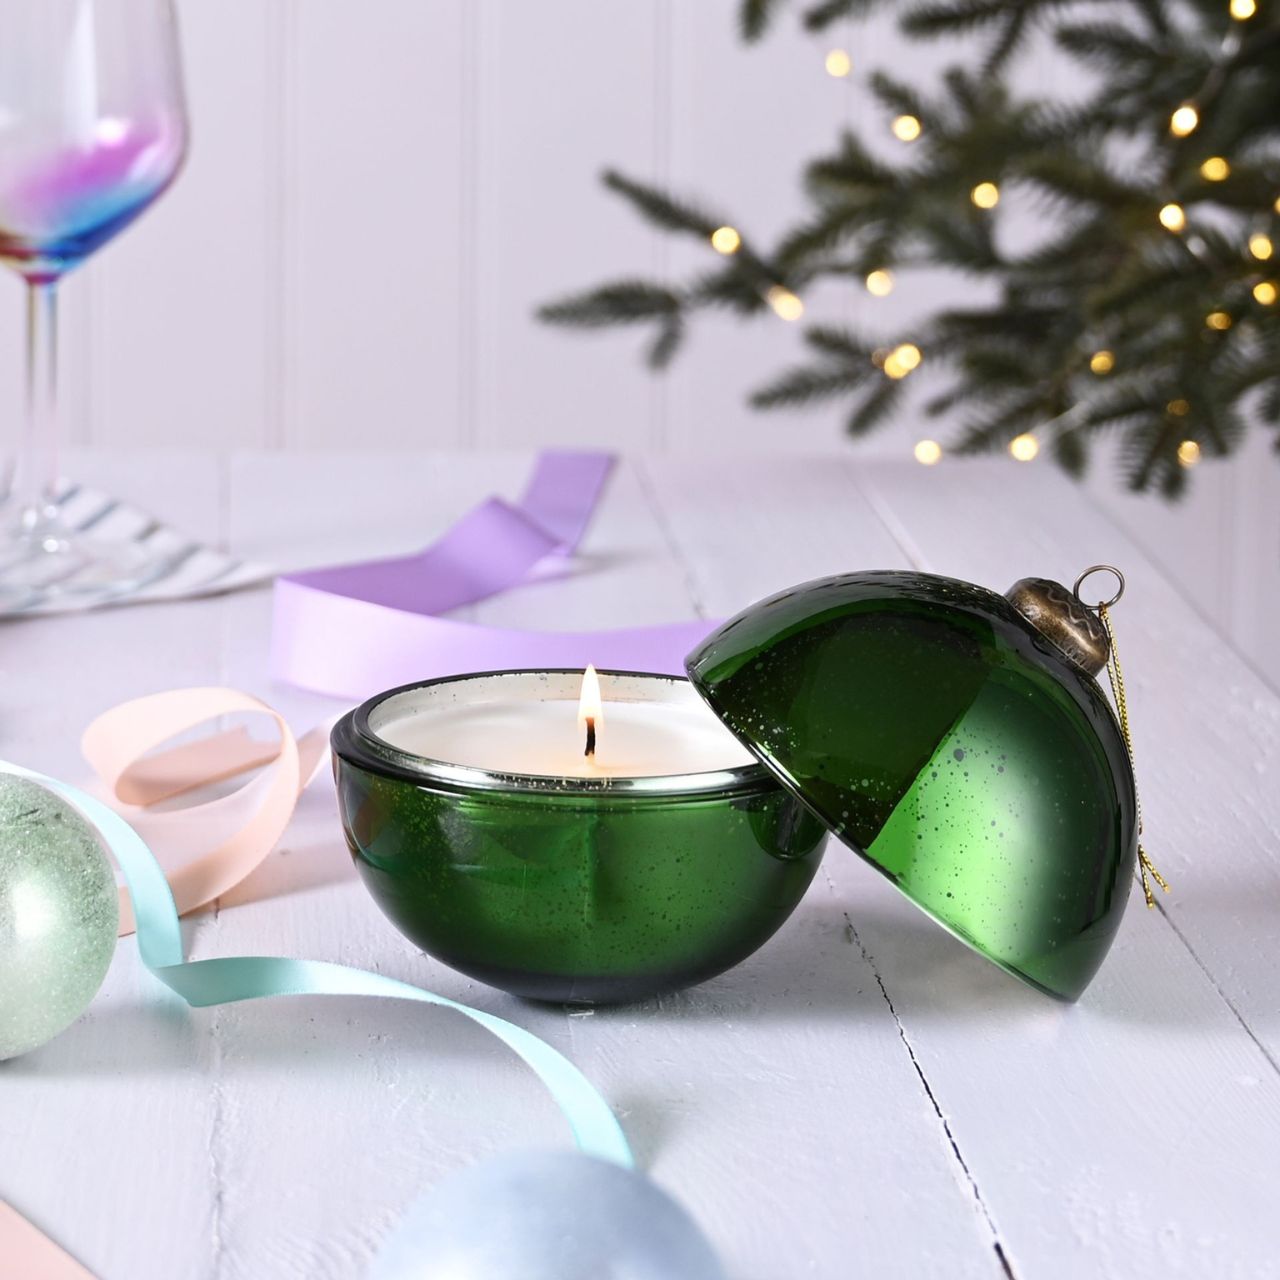 Green Holly & Fir Tree Fragranced Glass Bauble Candle  A Holly & Fir Tree fragranced glass bauble candle.  This aromatic candle makes an eye-catching addition to homes during the festive season.